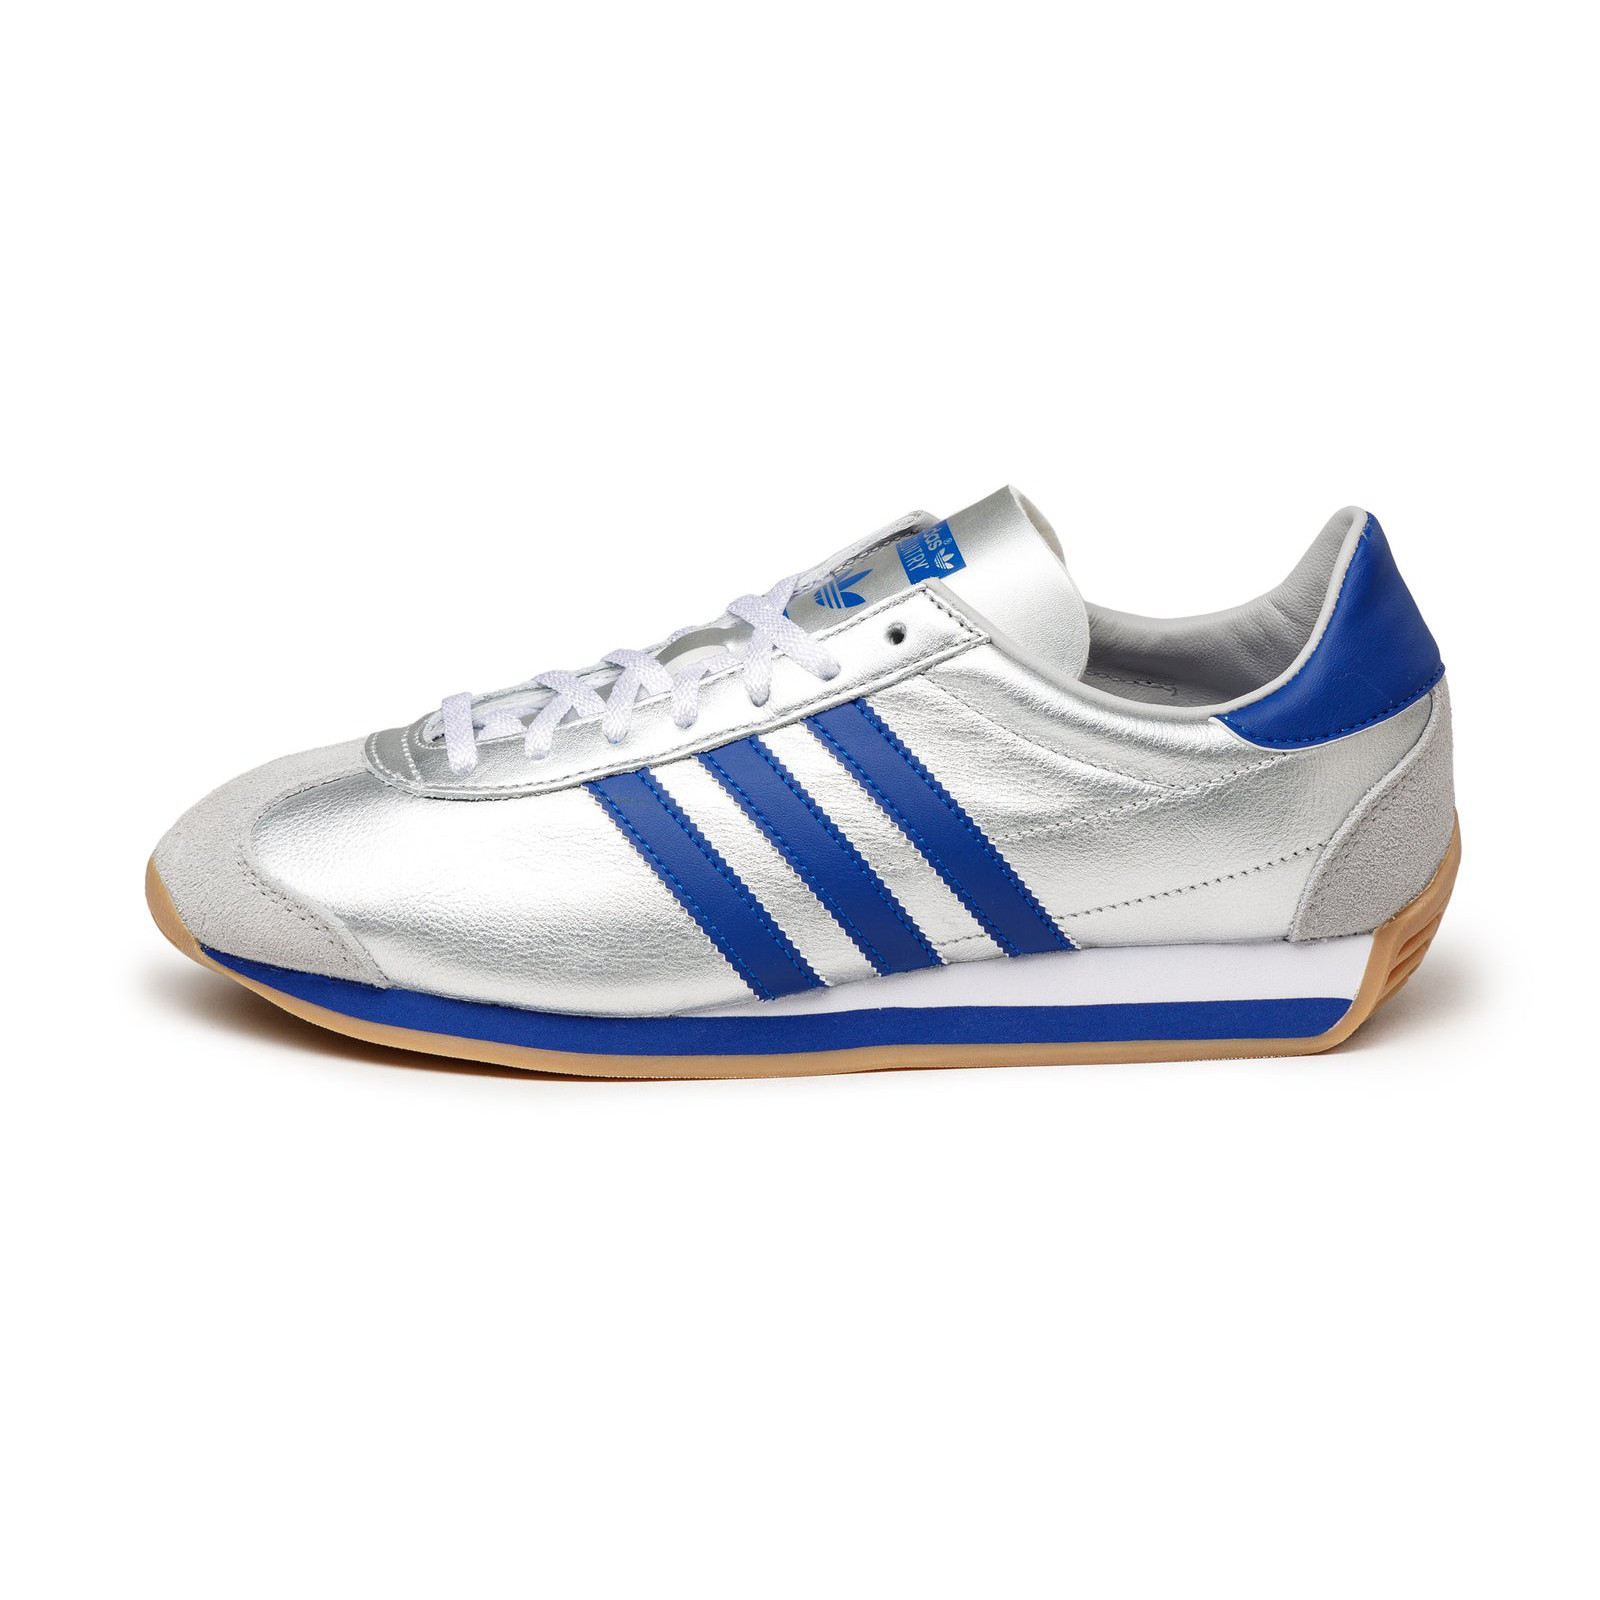 Adidas Country OG
Matte Silver / Bright Blue